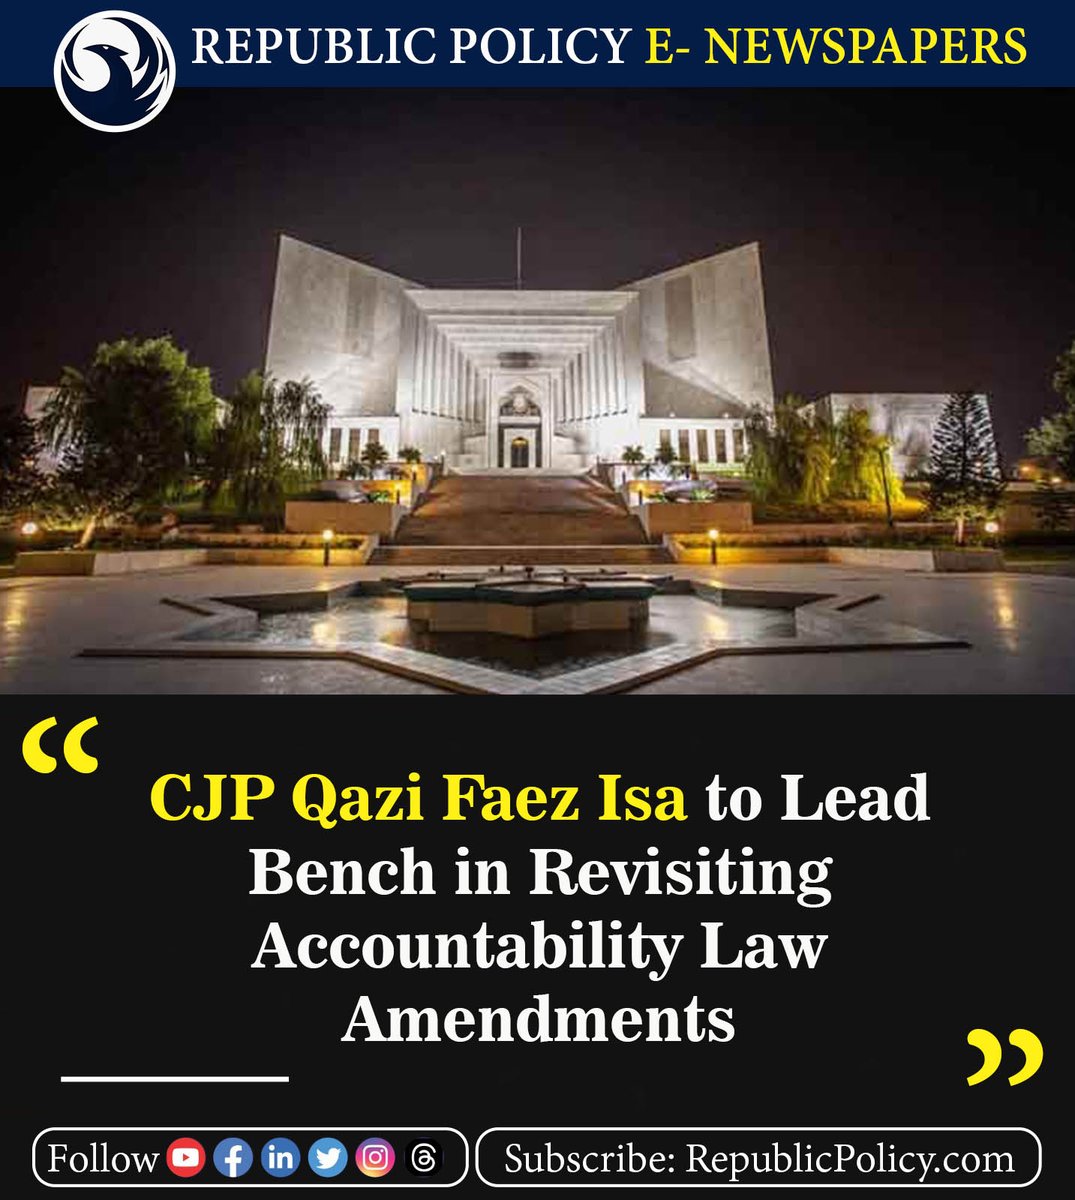 A larger bench led by Chief Justice of Pakistan (CJP) Qazi Faez Isa is scheduled to consider the federal government’s intra-court appeal.

Read more: republicpolicy.com/cjp-qazi-faez-…

#CJPQaziFaezIsa #BenchLedByCJP #IntraCourtAppeal #PakistaniJudiciary #News